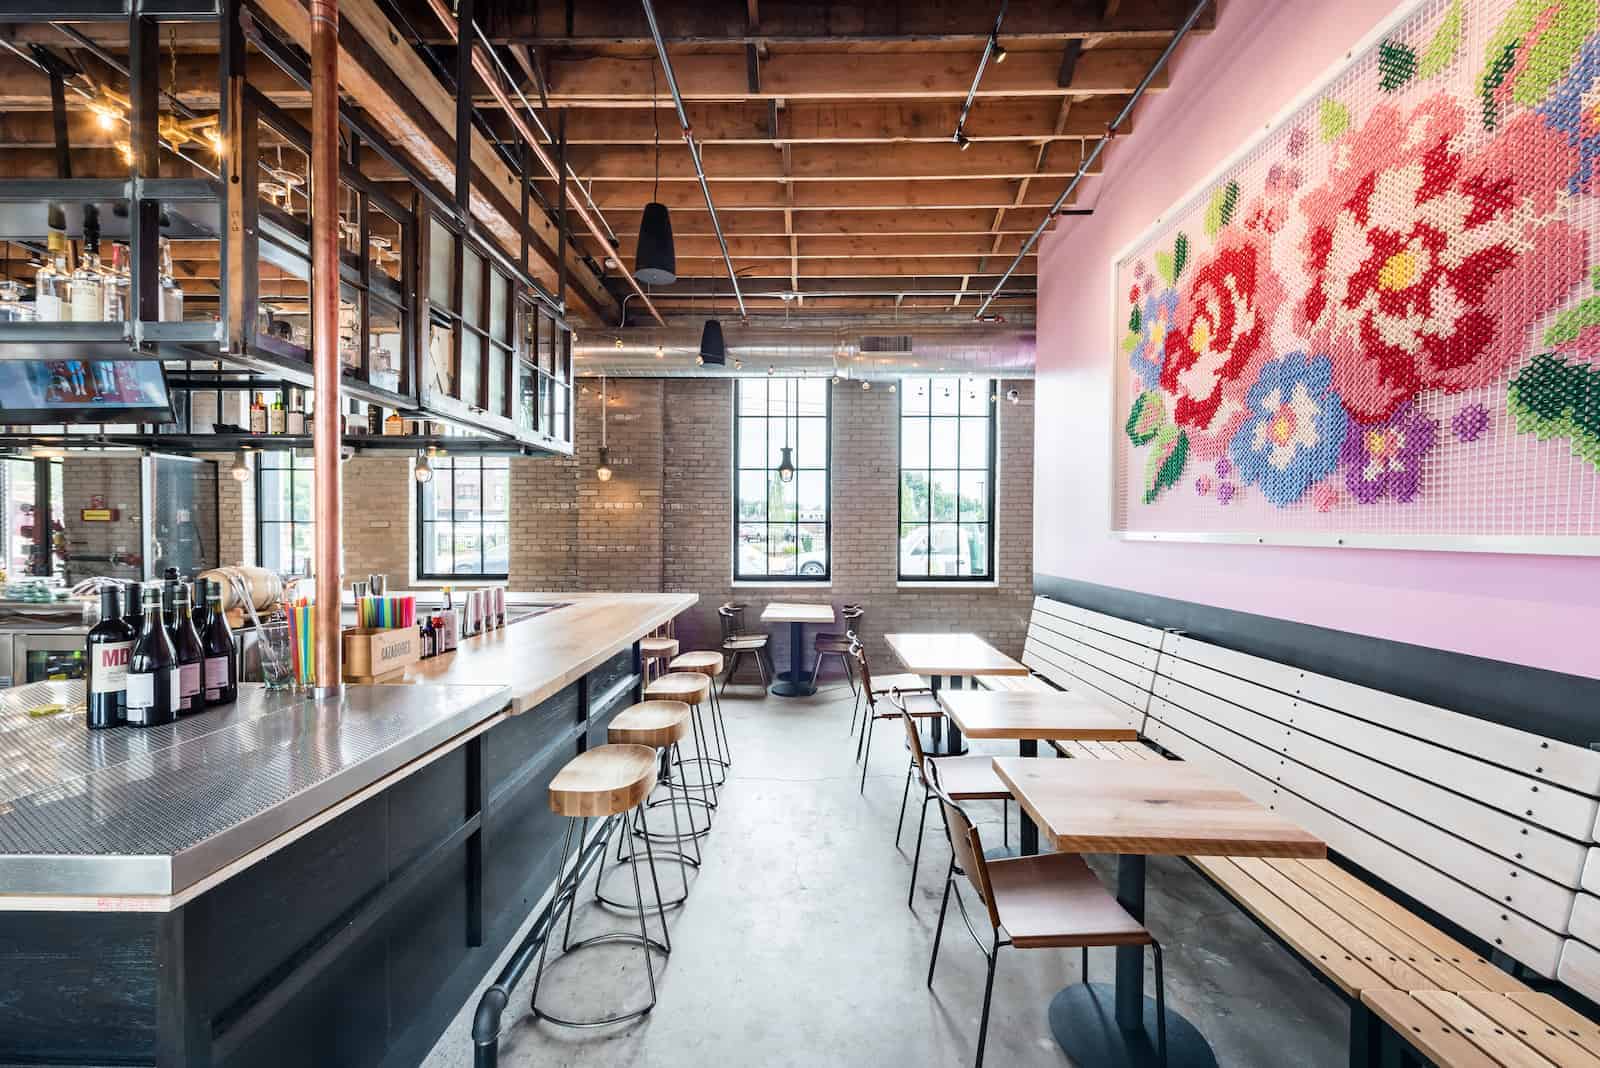 You are currently viewing Fire-Retardant Fabrics for a Fiery Taqueria in Minneapolis